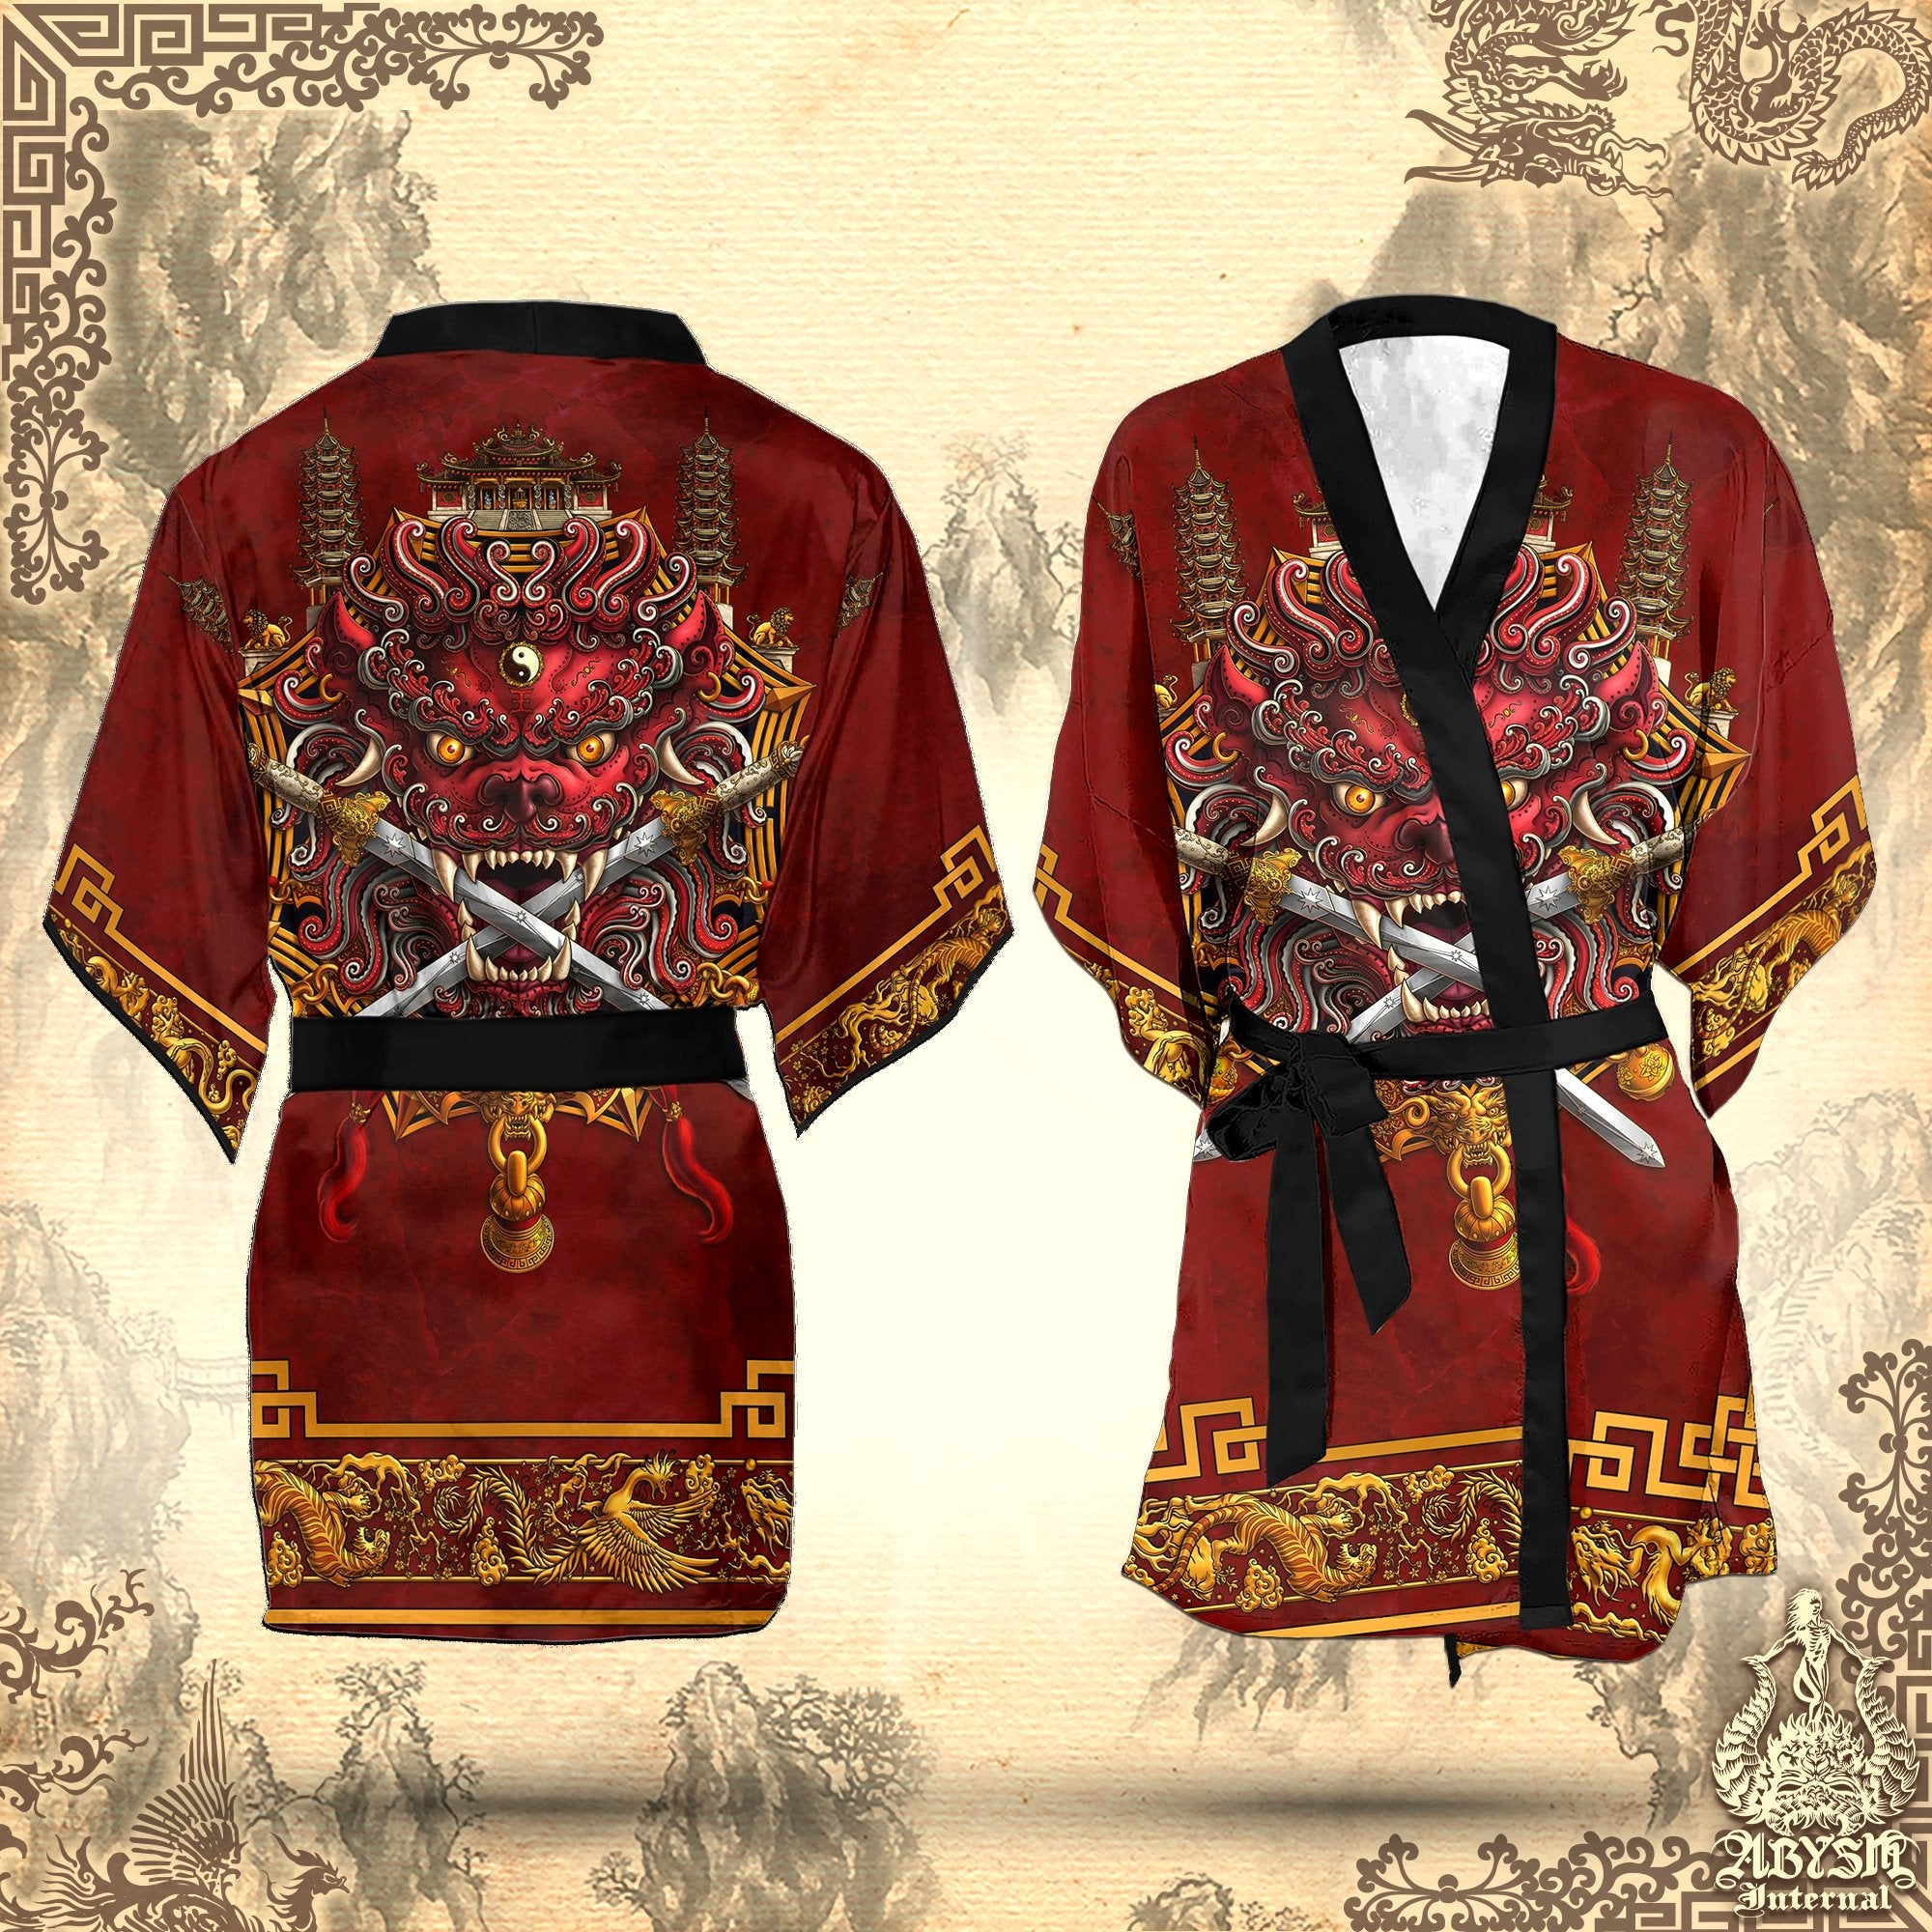 Sword Lion Cover Up, Beach Outfit, Chinese Party Kimono, Taiwan Summer Festival Robe, Asian Indie and Alternative Clothing, Unisex - Red - Abysm Internal